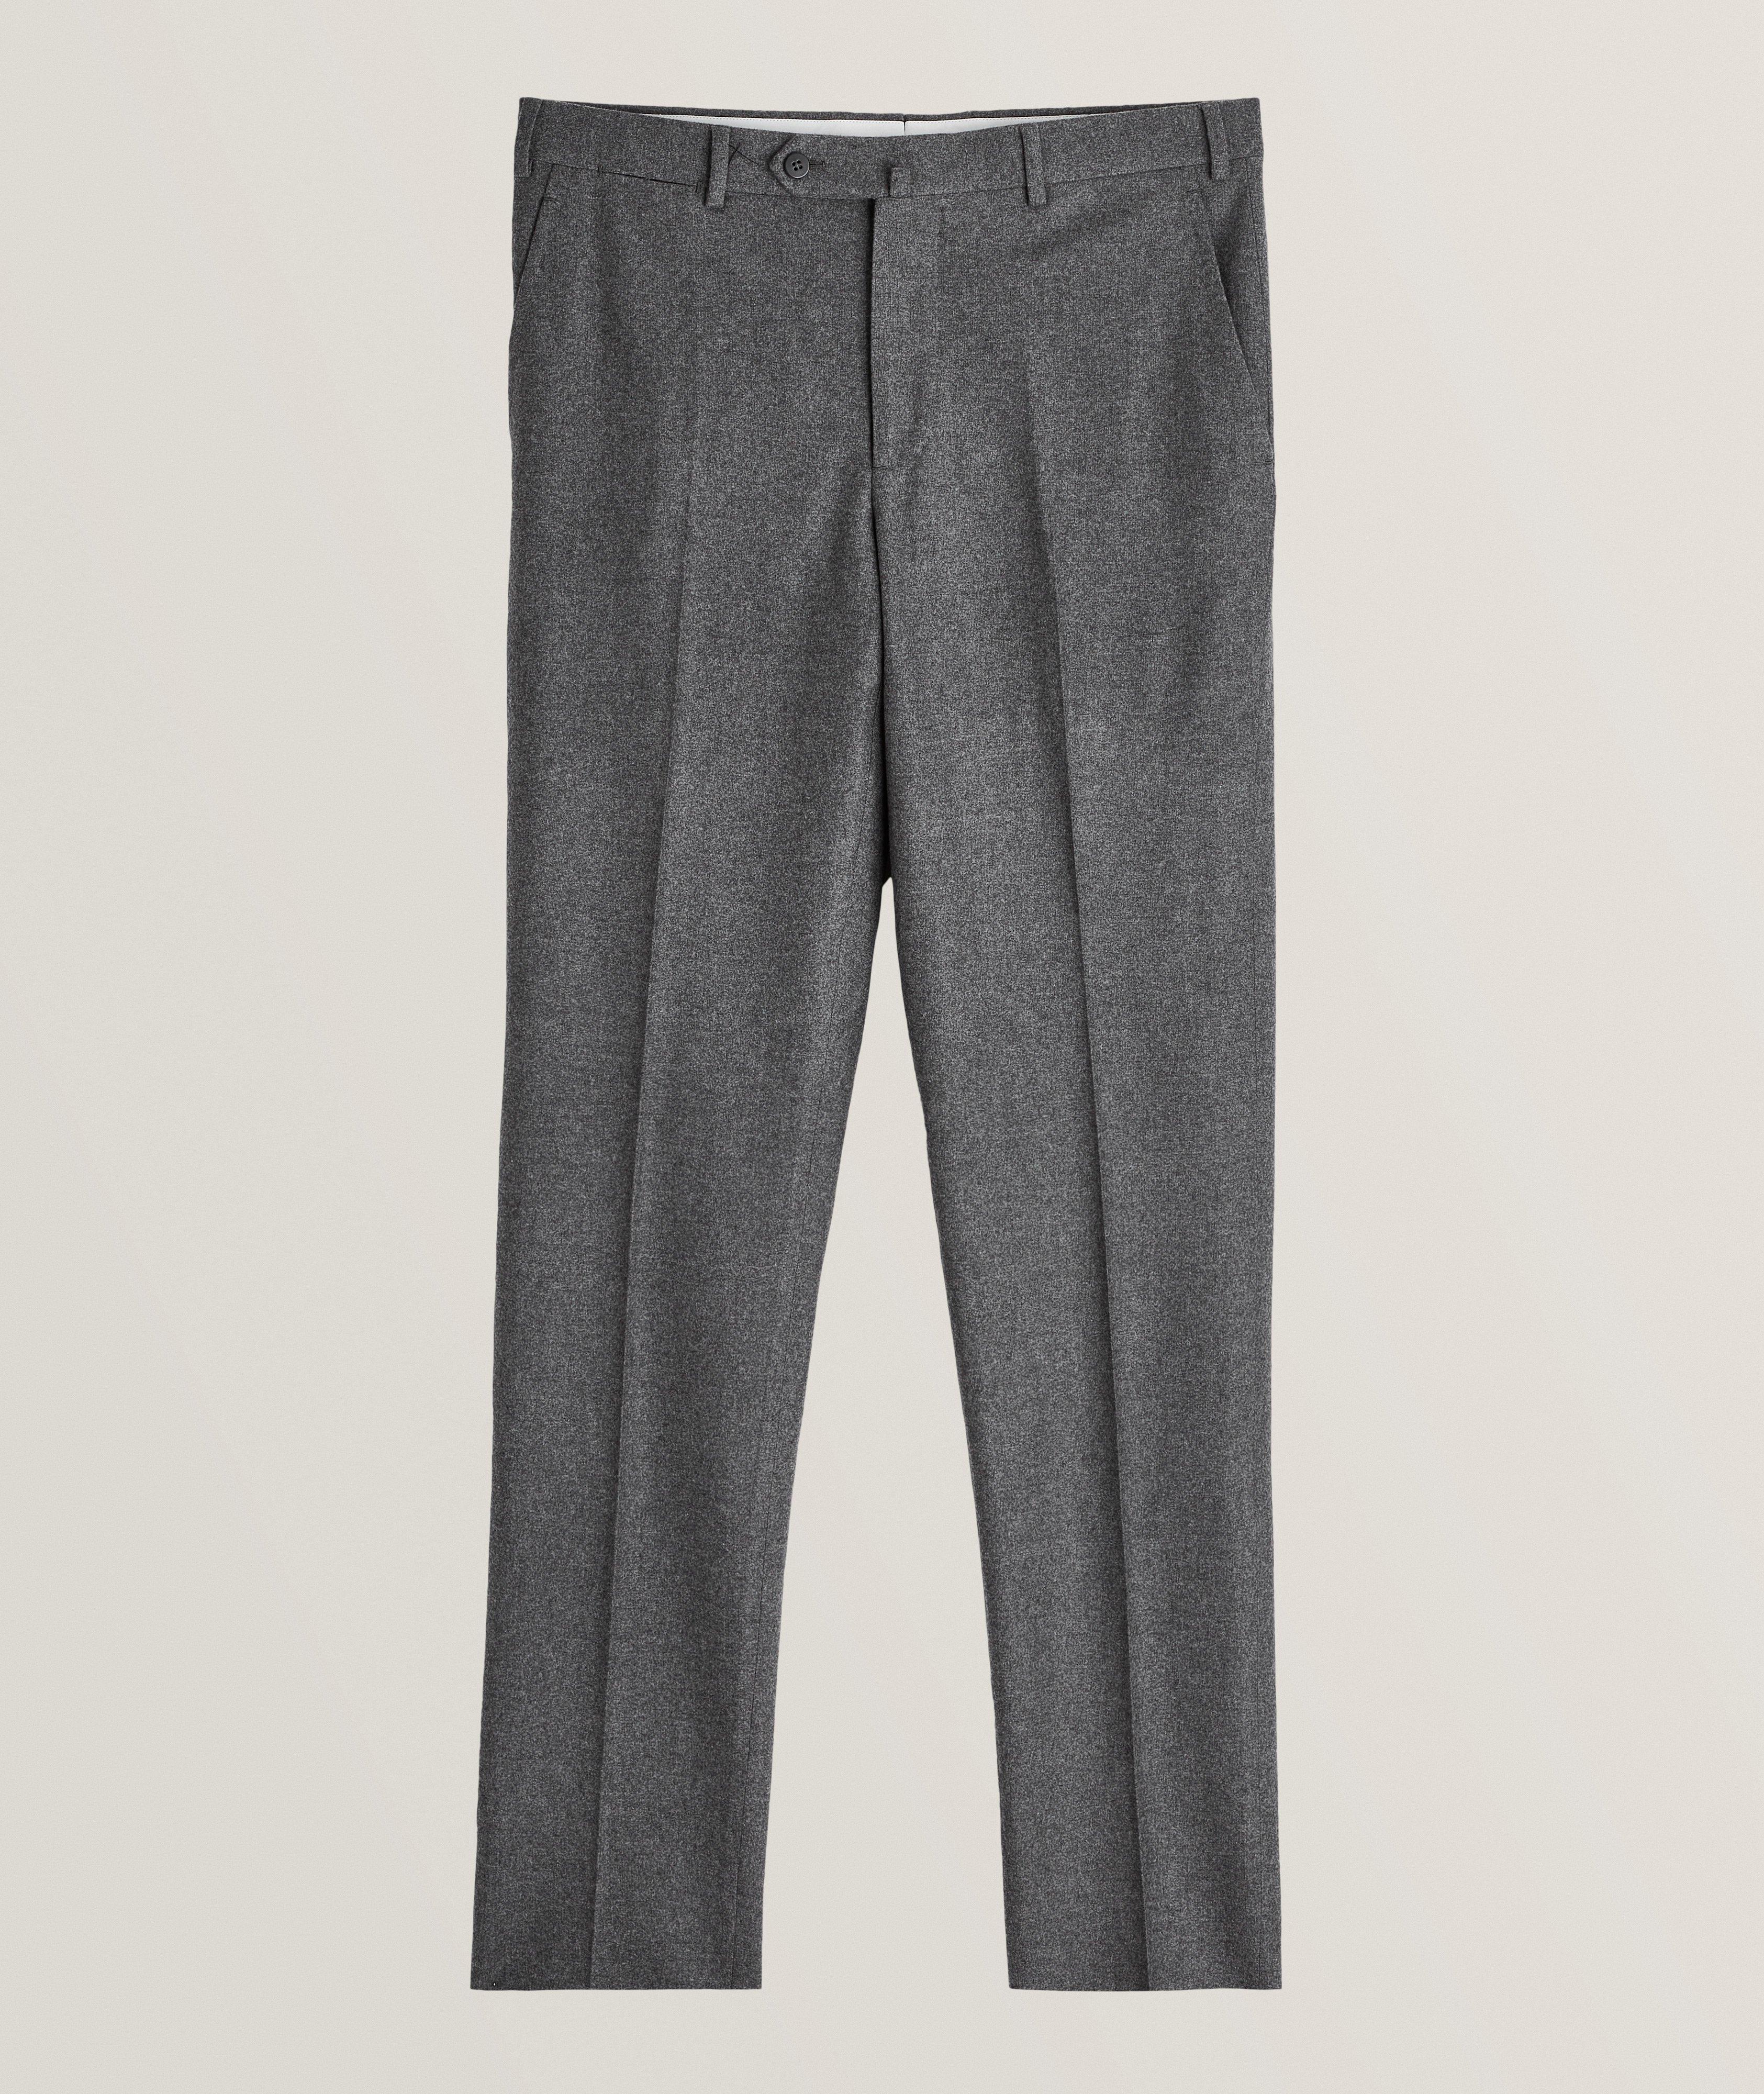 Flannel Stretch Wool-Cashmere Blend Pants image 0